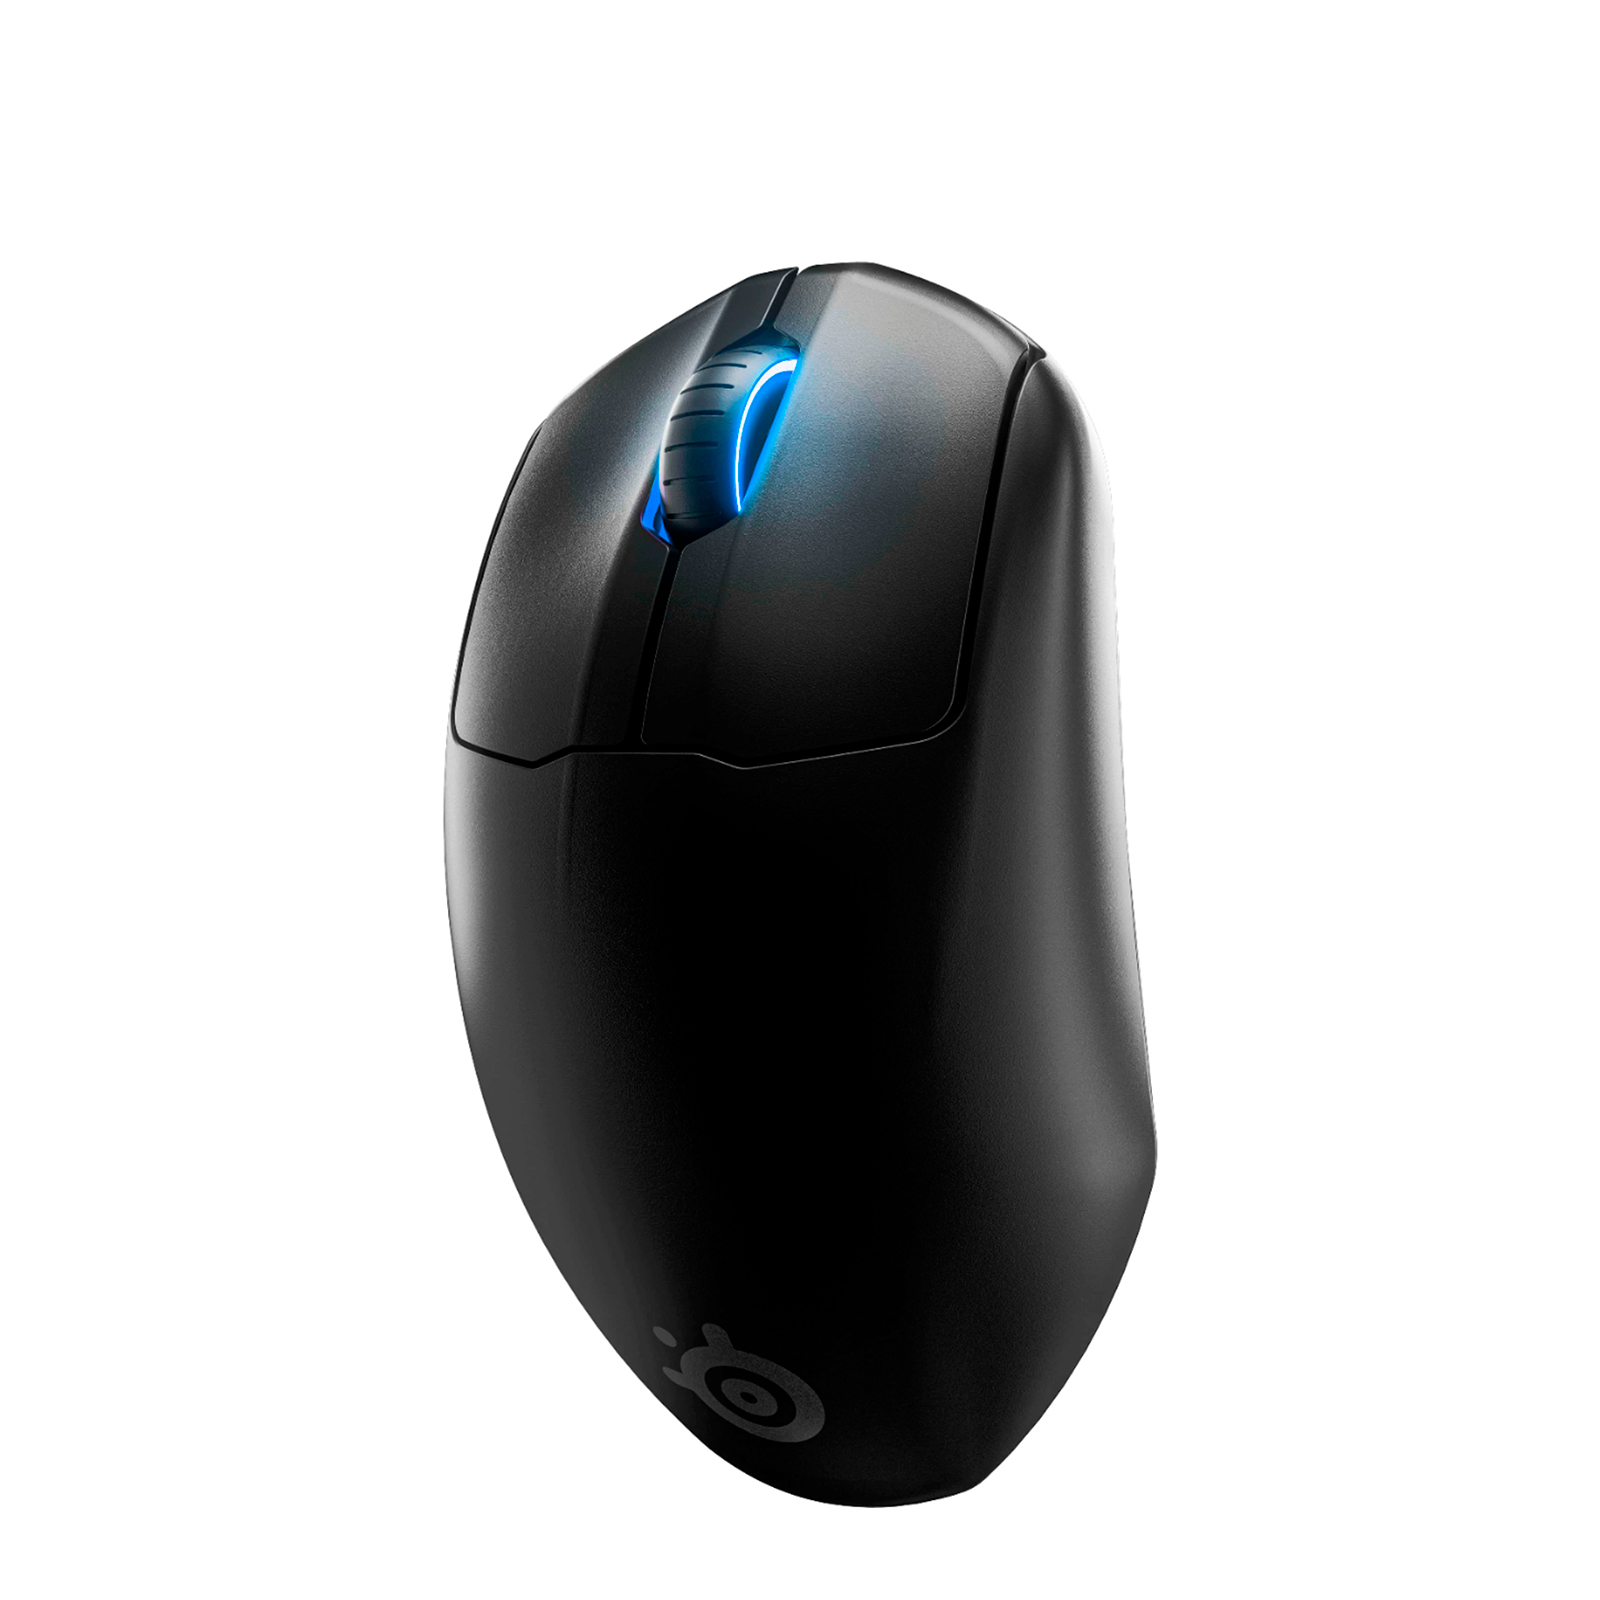 Mouse Gamer Steelseries Prime Wireless - Clones y Periféricos